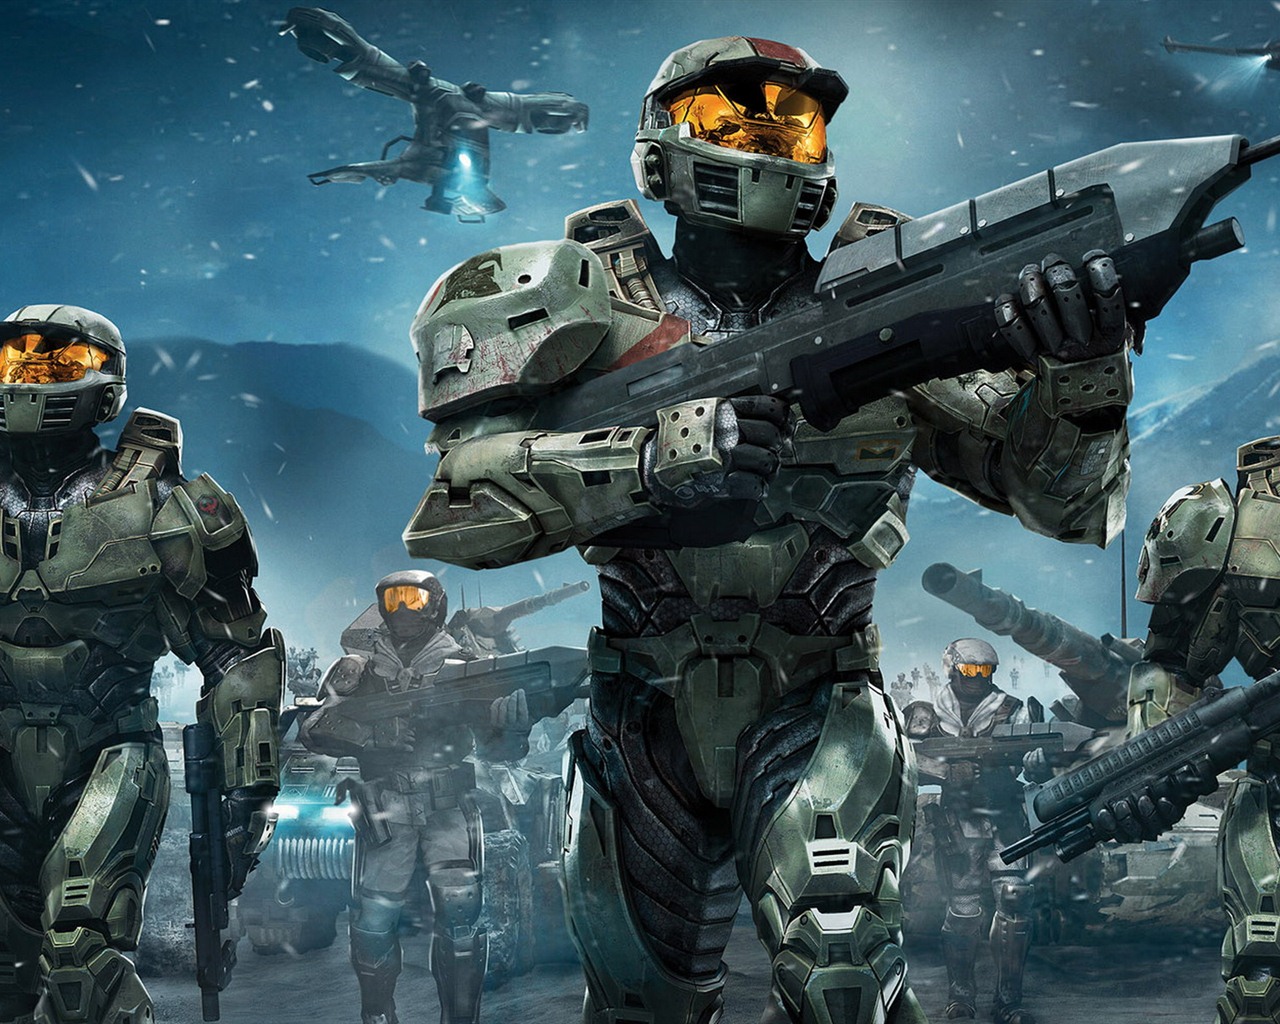 Halo Game HD Wallpapers #25 - 1280x1024